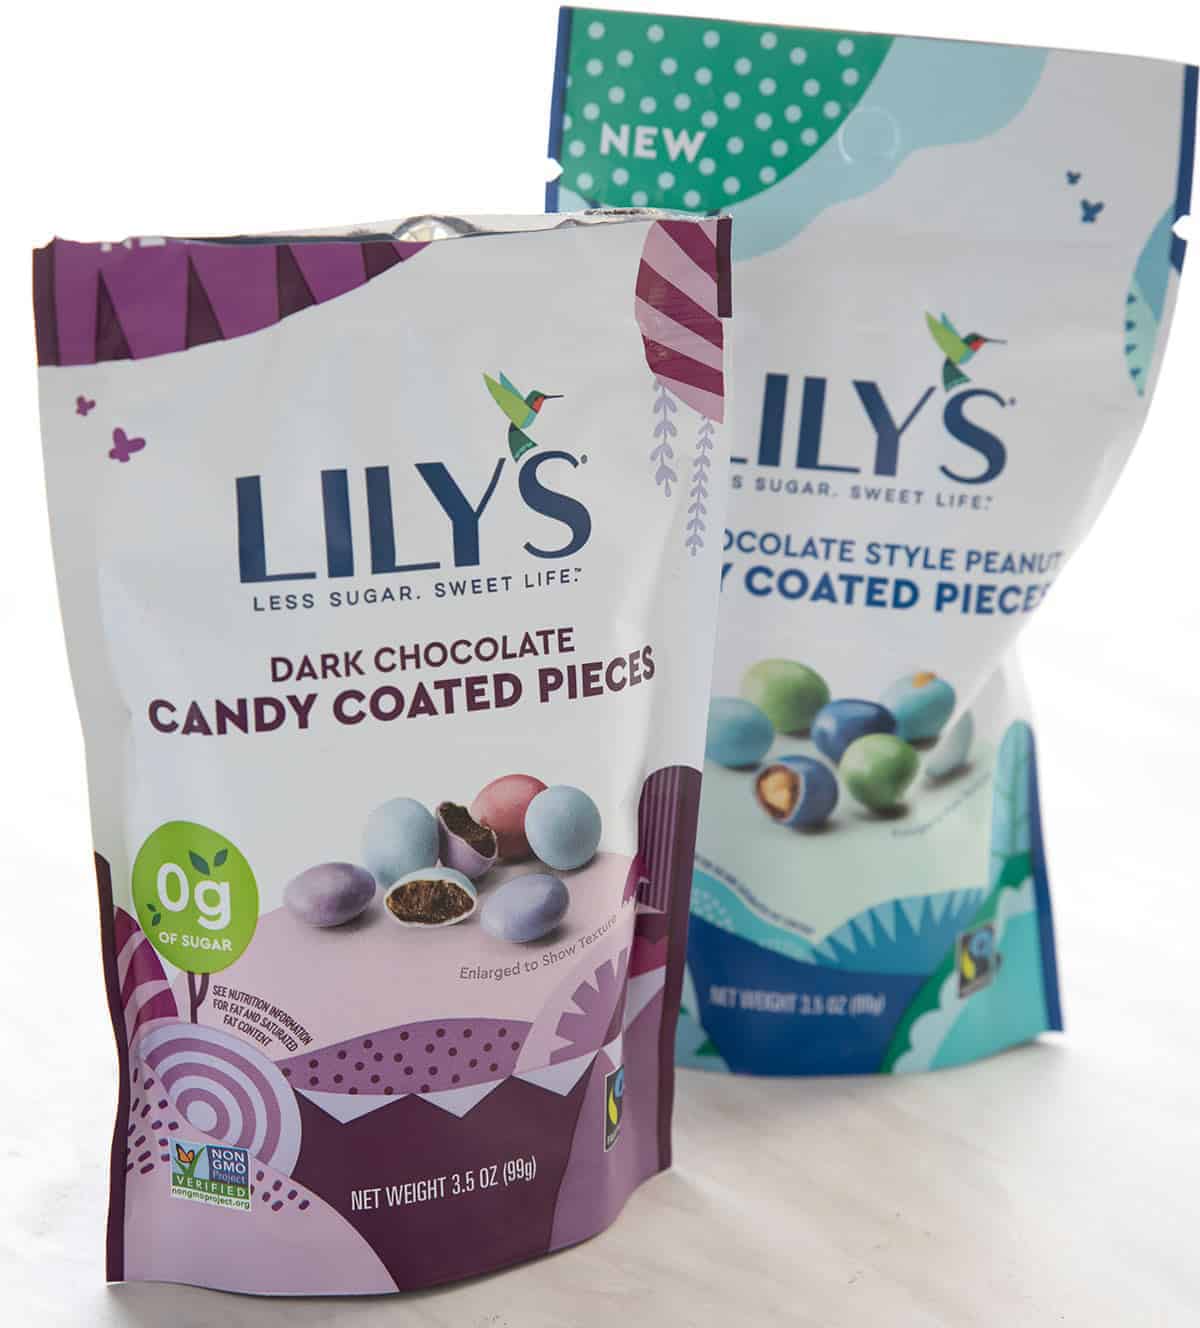 Two bags of Lily's candy coated chocolate pieces.